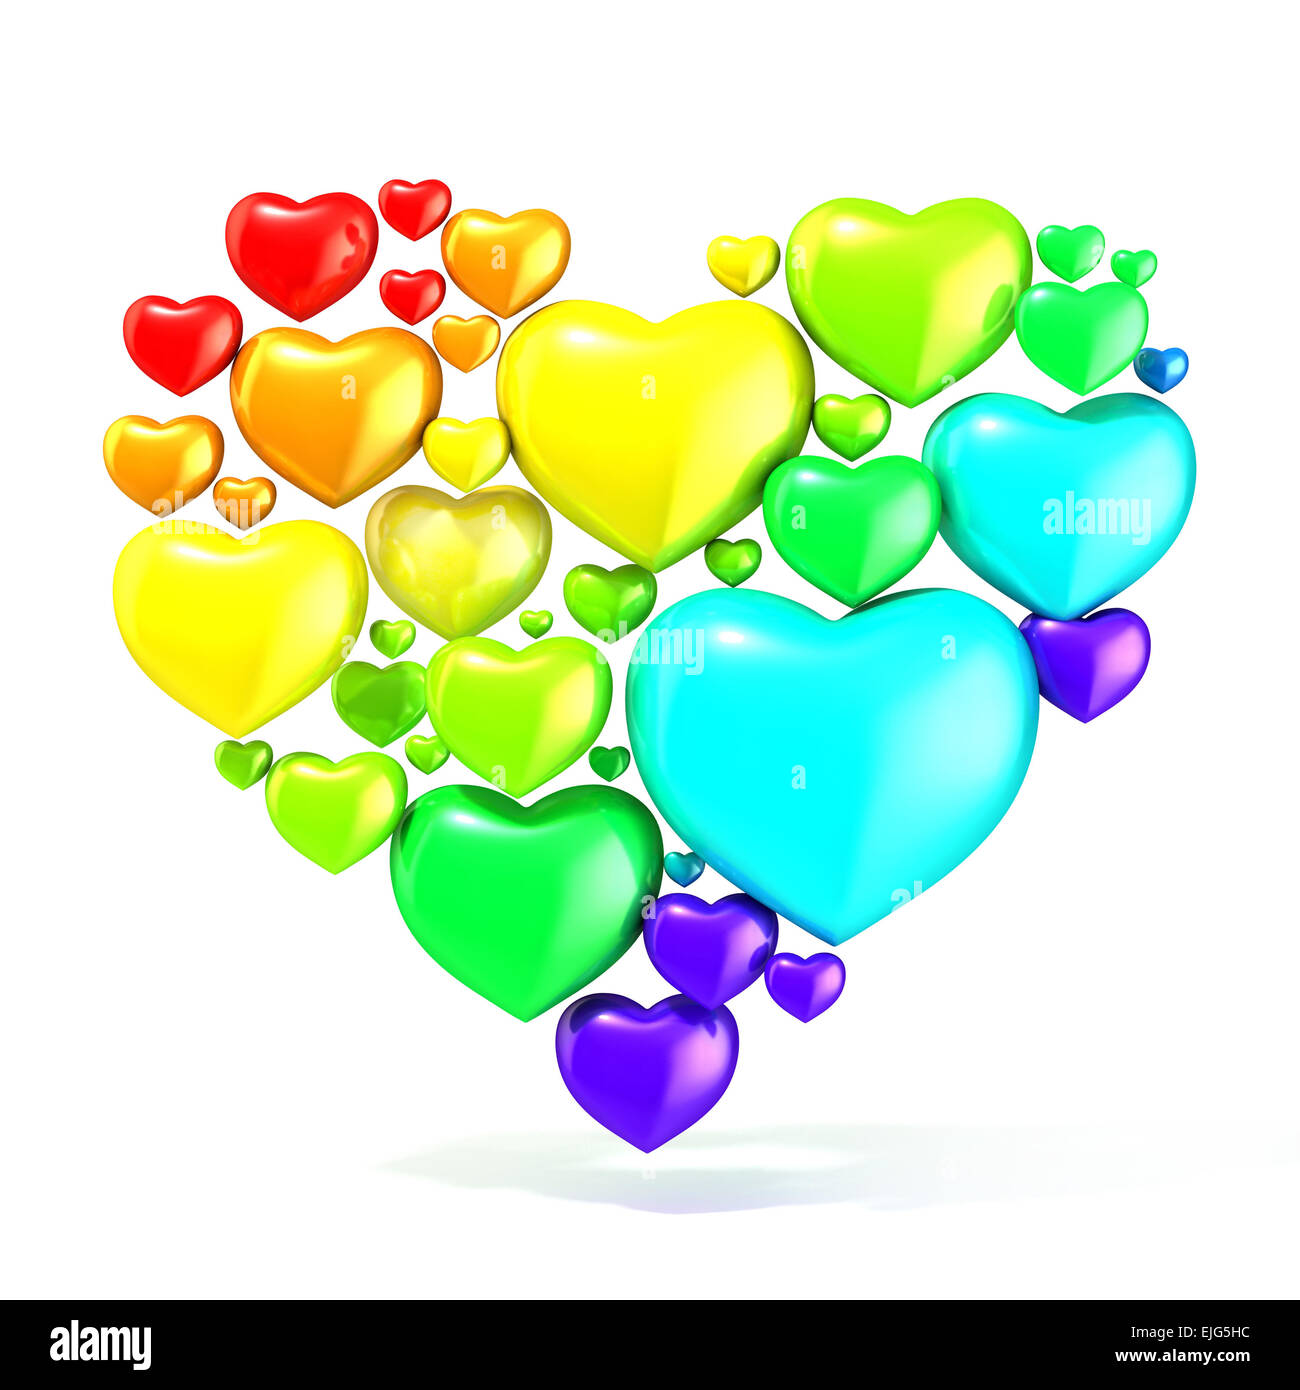 Sweet, colorful, beautiful hearts on white background, arranged in shape of big heart. 3D render illustration Stock Photo